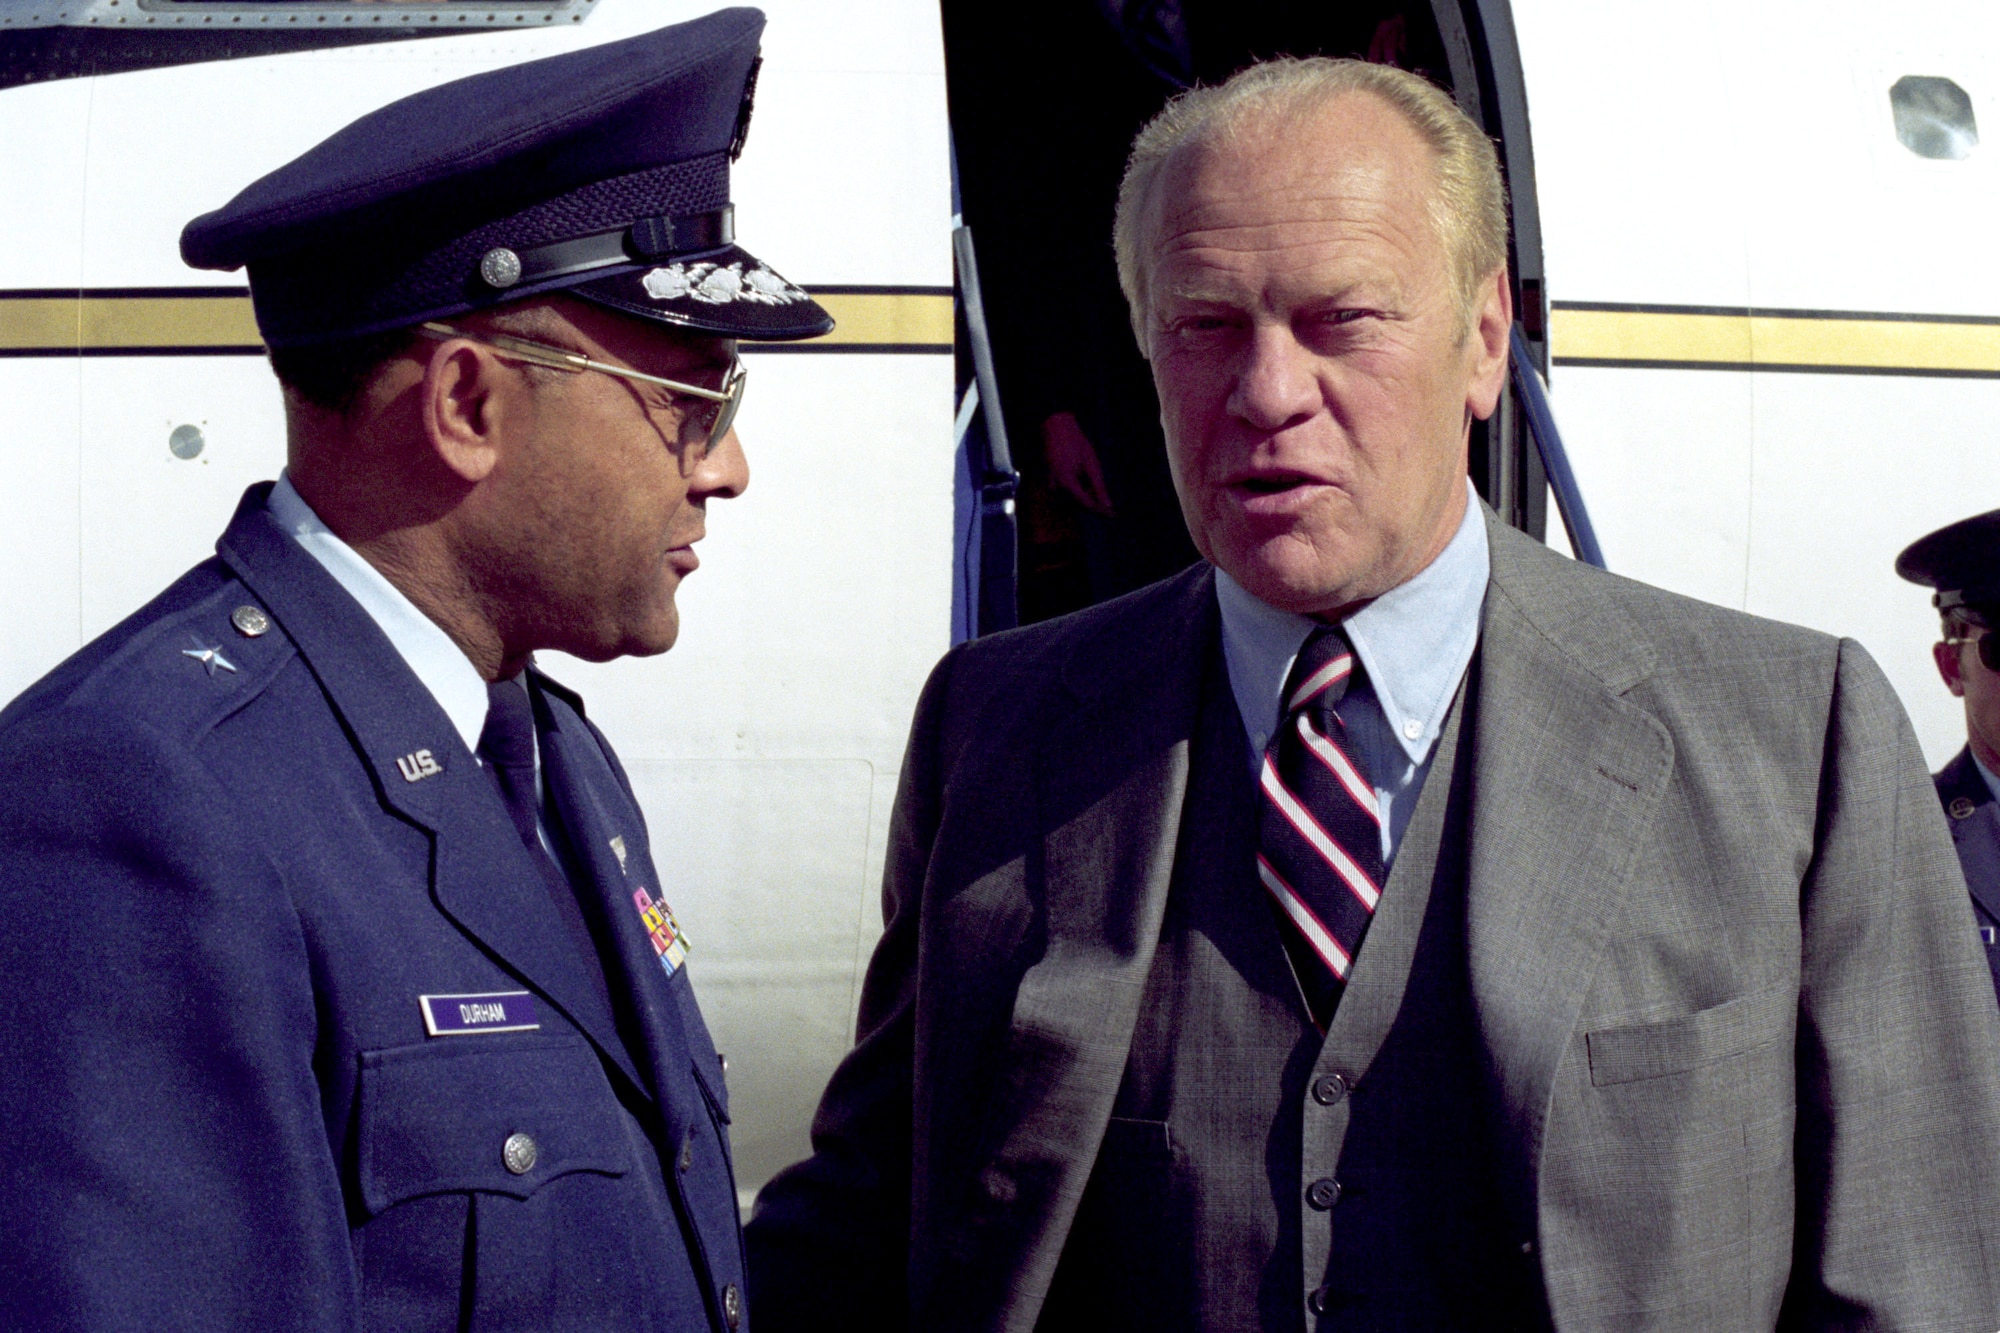 Brig. Gen. Archer L. Durham greets former President Gerald Ford as he arrives for a visit at Andrews Air Force Base, Md., in 1981. President Ford passed away in his California home Dec. 26 at age 93. General Durham was commander of the 76th Military Airlift Division at Andrews AFB. (U.S. Air Force photo)